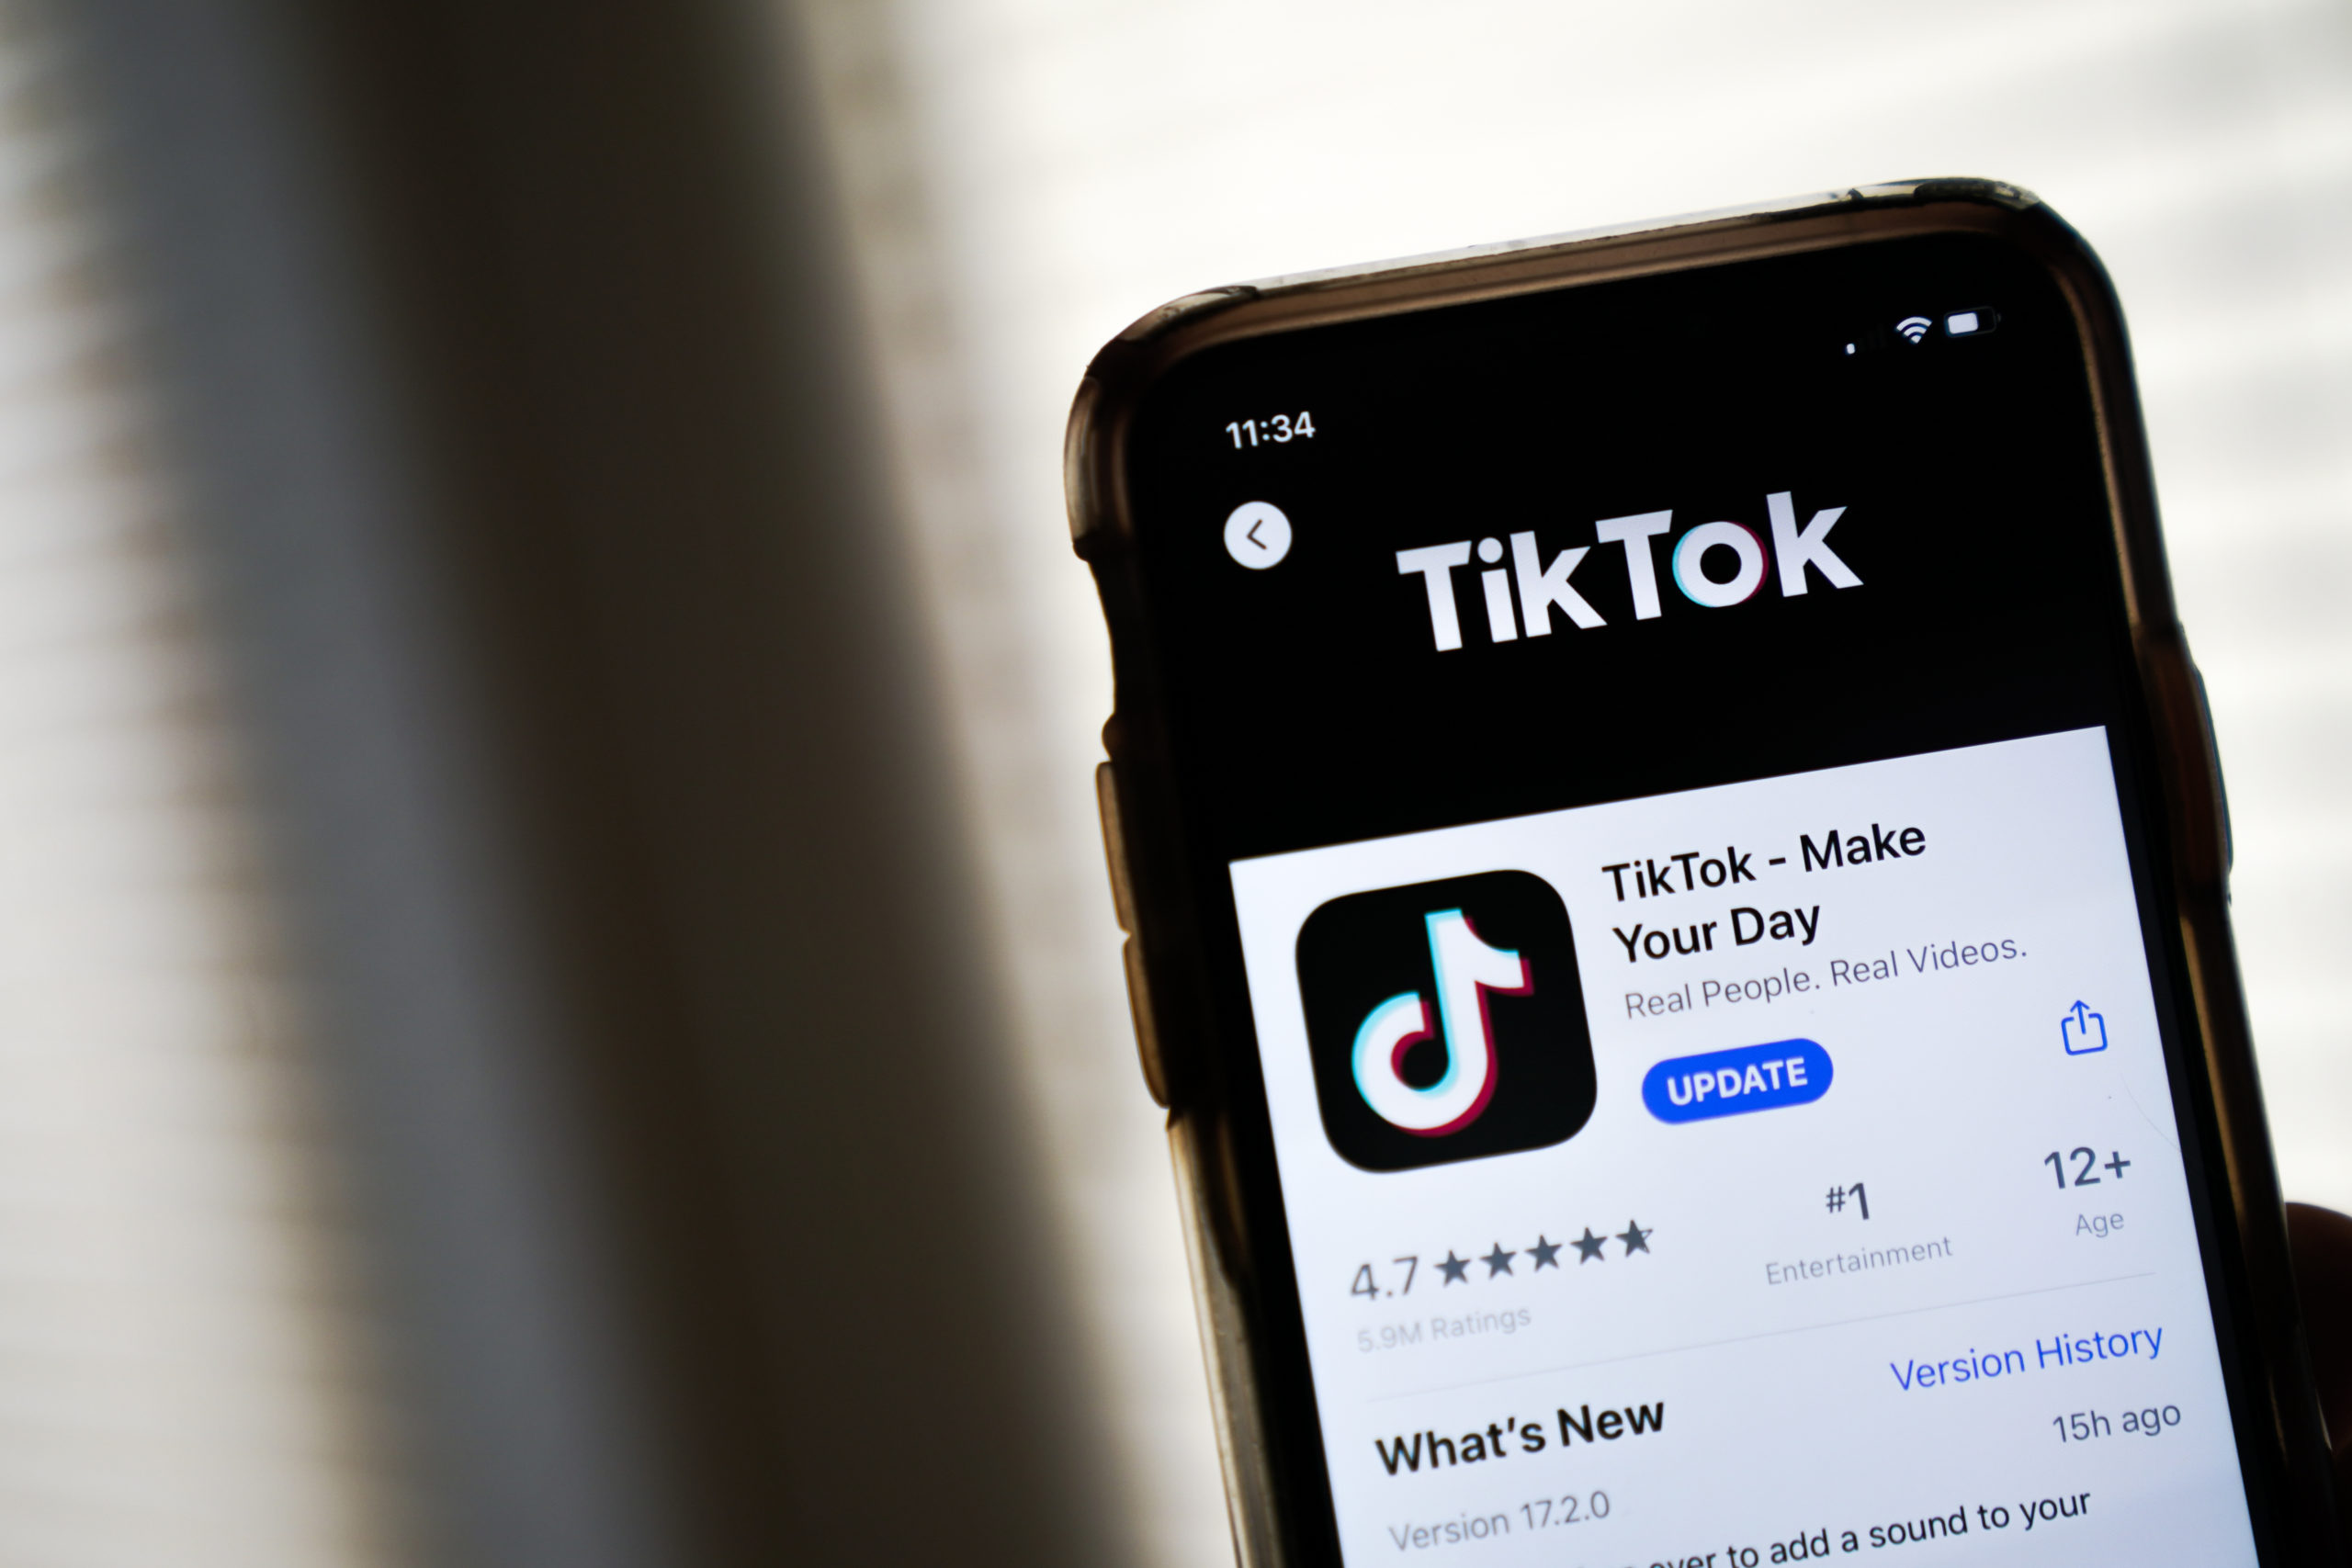 WASHINGTON, DC - AUGUST 07: In this photo illustration, the download page for the TikTok app is displayed on an Apple iPhone on August 7, 2020 in Washington, DC. On Thursday evening, President Donald Trump signed an executive order that bans any transactions between the parent company of TikTok, ByteDance, and U.S. citizens due to national security reasons. The president signed a separate executive order banning transactions with China-based tech company Tencent, which owns the app WeChat. Both orders are set to take effect in 45 days. (Photo Illustration by Drew Angerer/Getty Images)